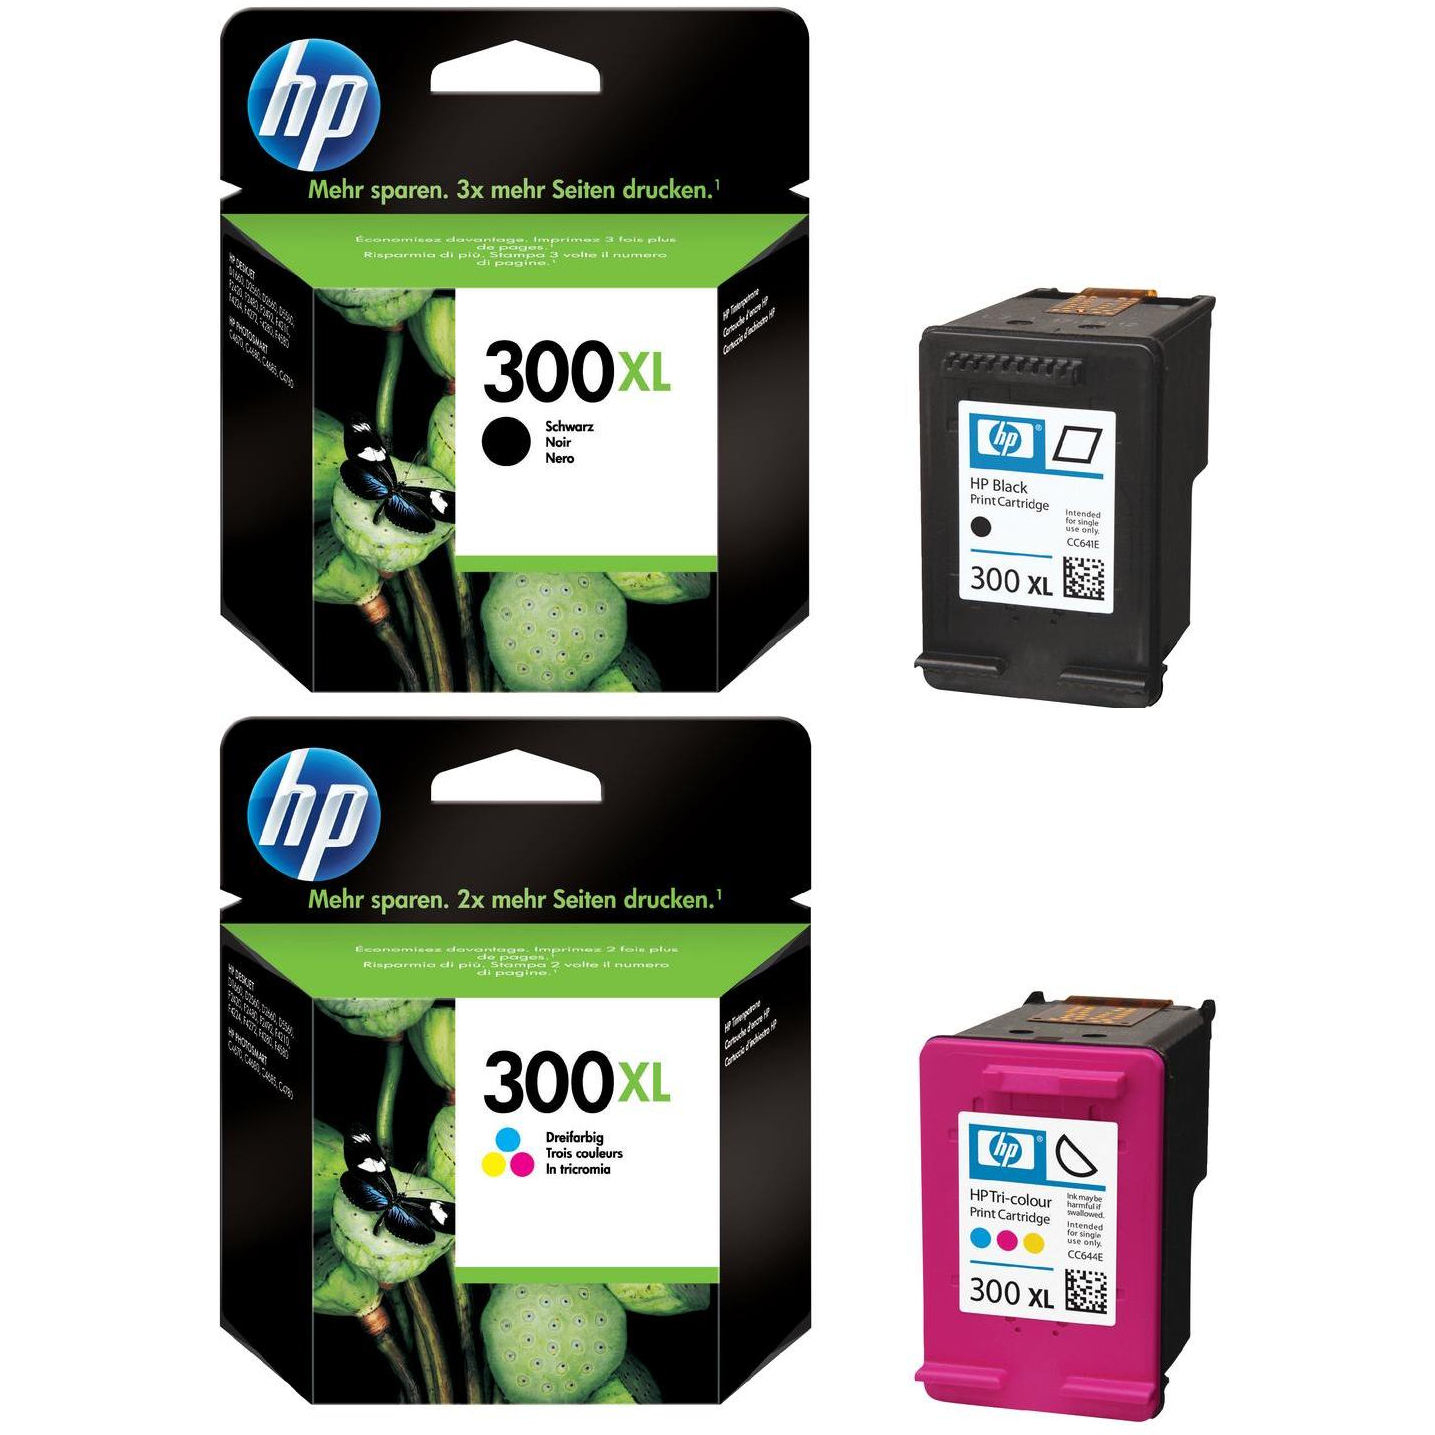 Related to Deskjet 4280 Cartridges: HP-300XL-Pack